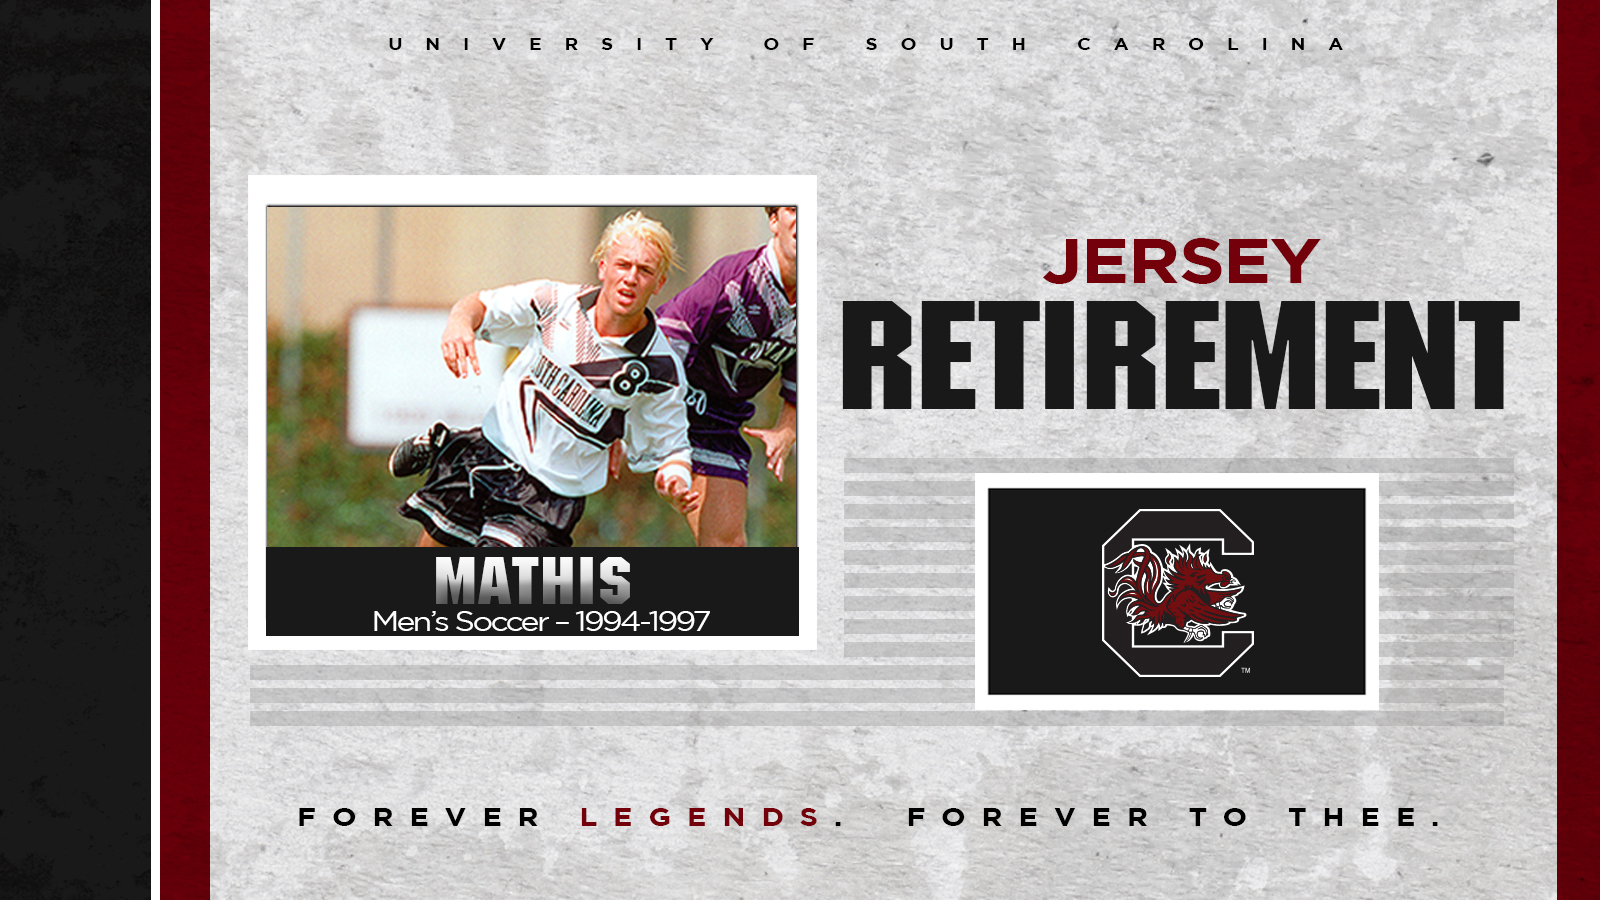 Gamecocks To Retire Jersey Of Clint Mathis